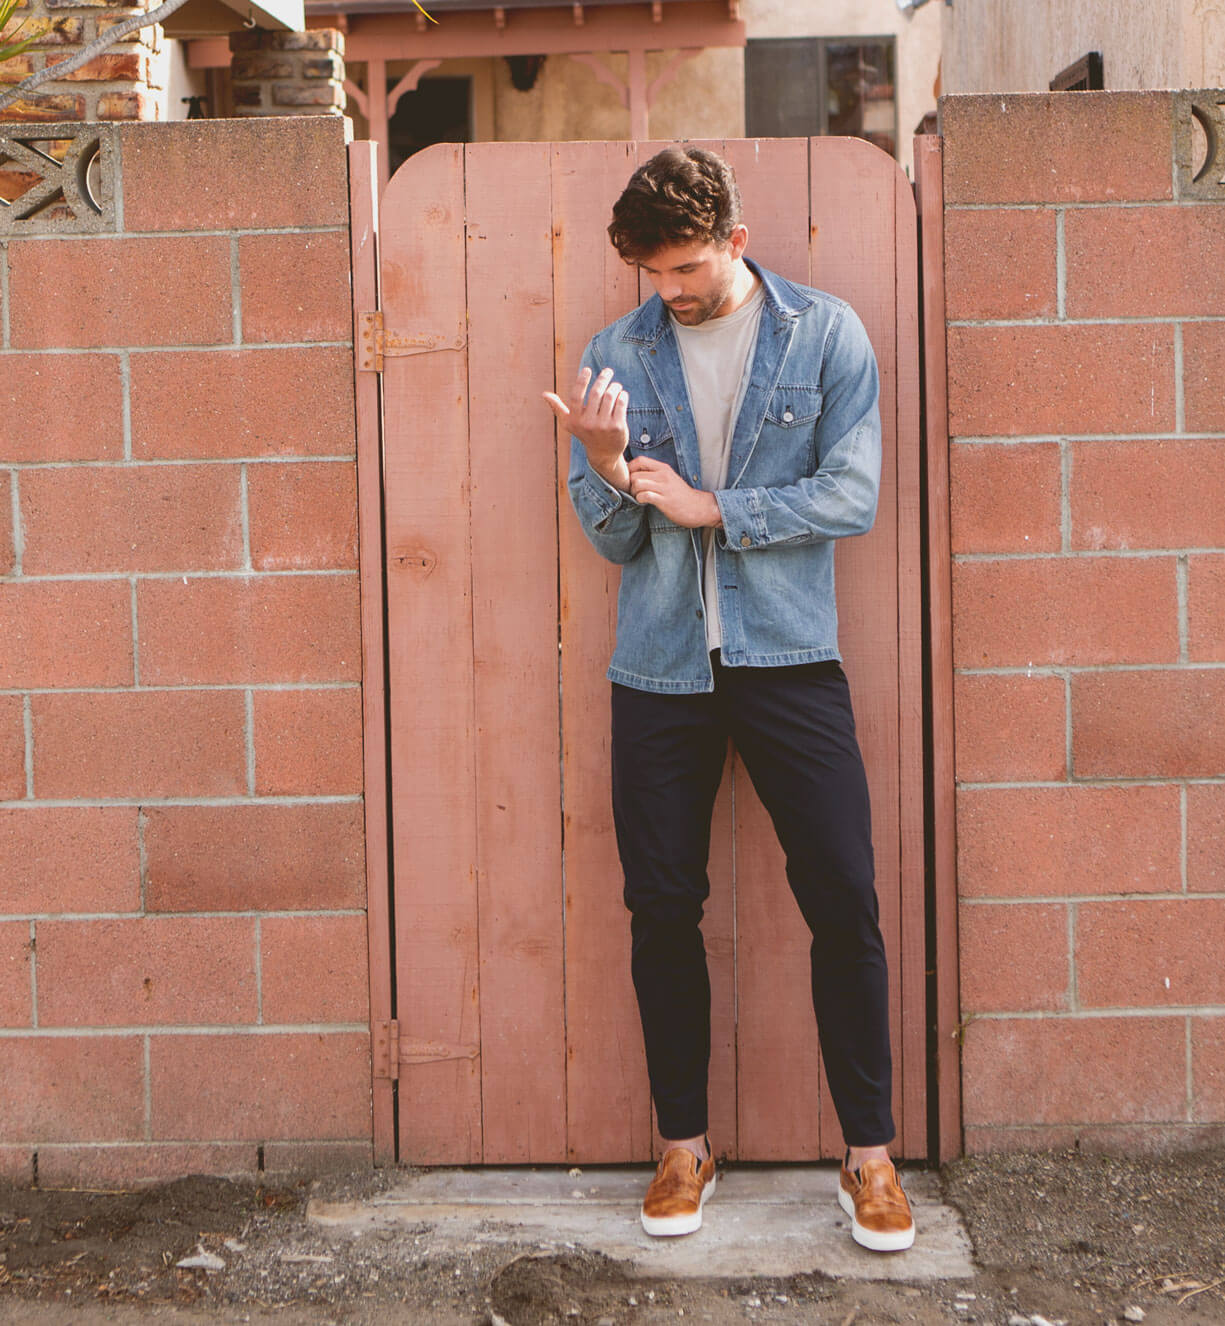 A man leaning against a brick wall holding a Bed Stu cell phone named Harry.